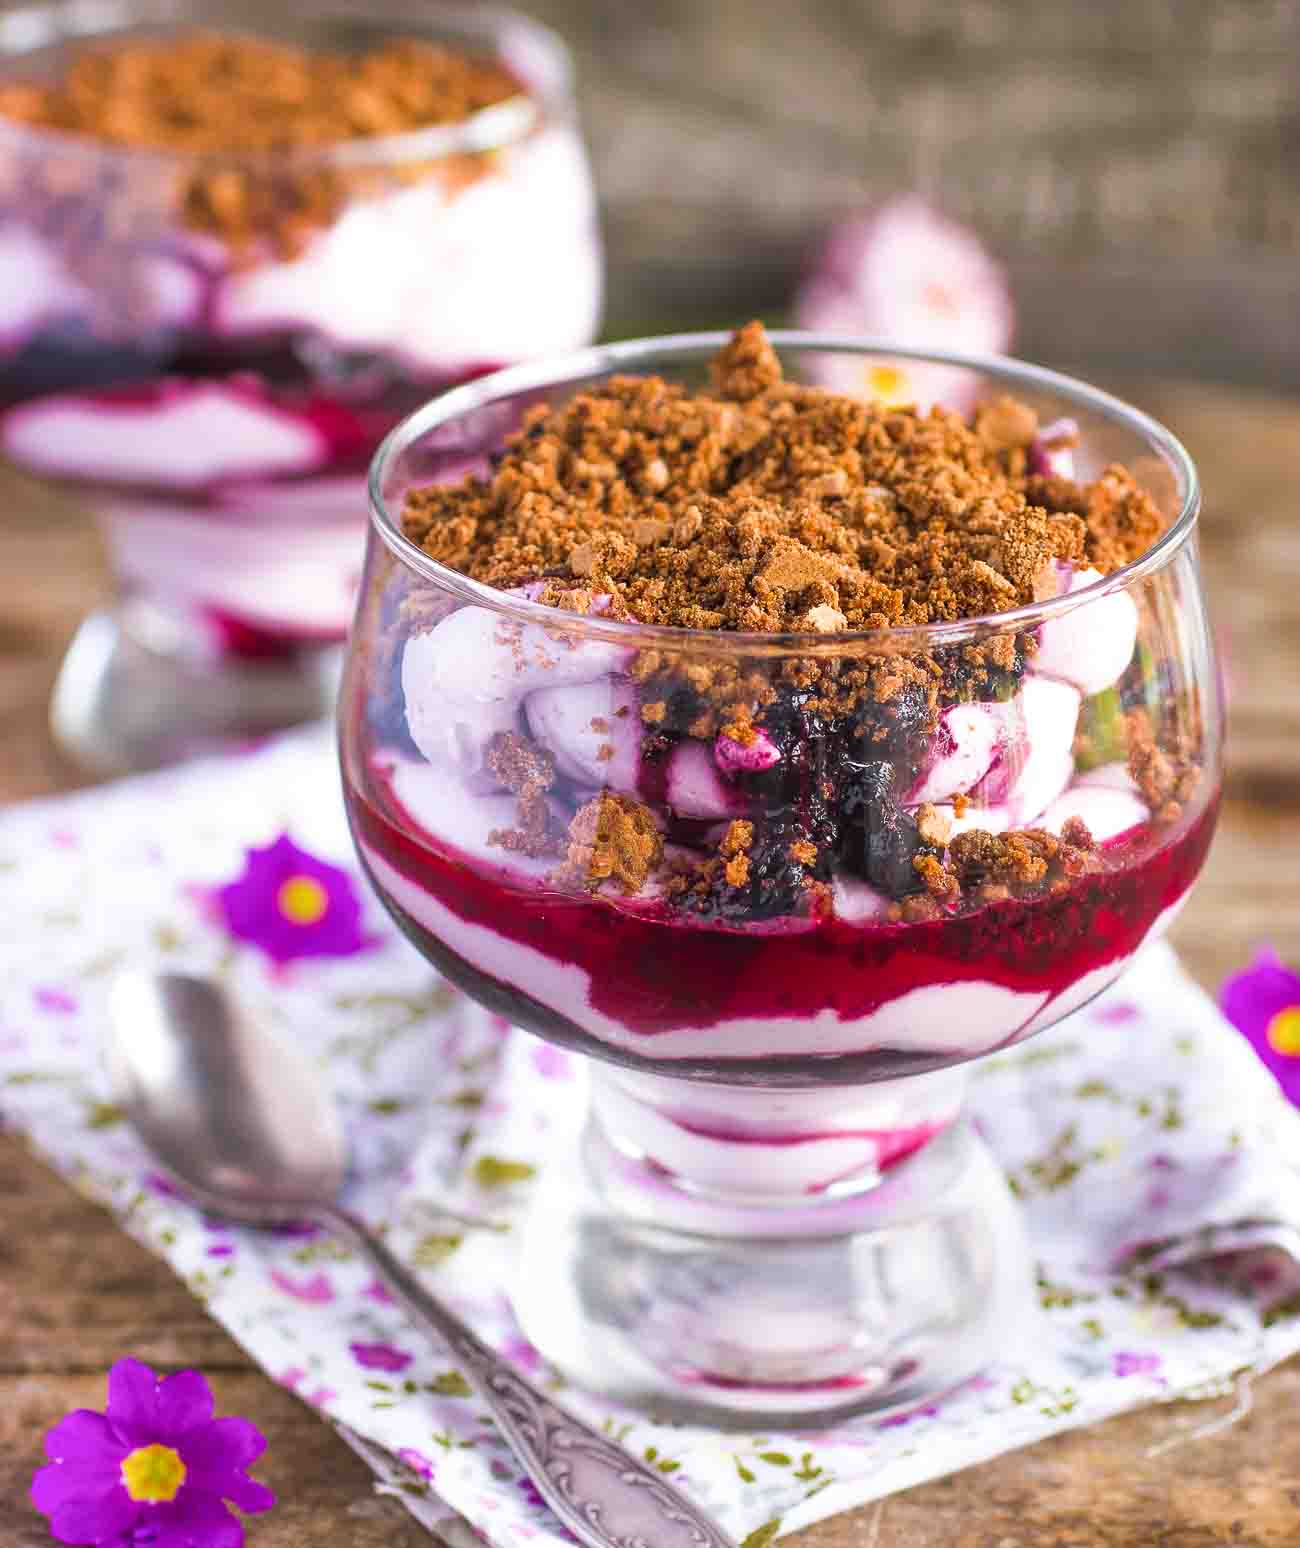 Blueberry Fool Recipe - Quick Dessert with Whipped Cream & Fresh Berries